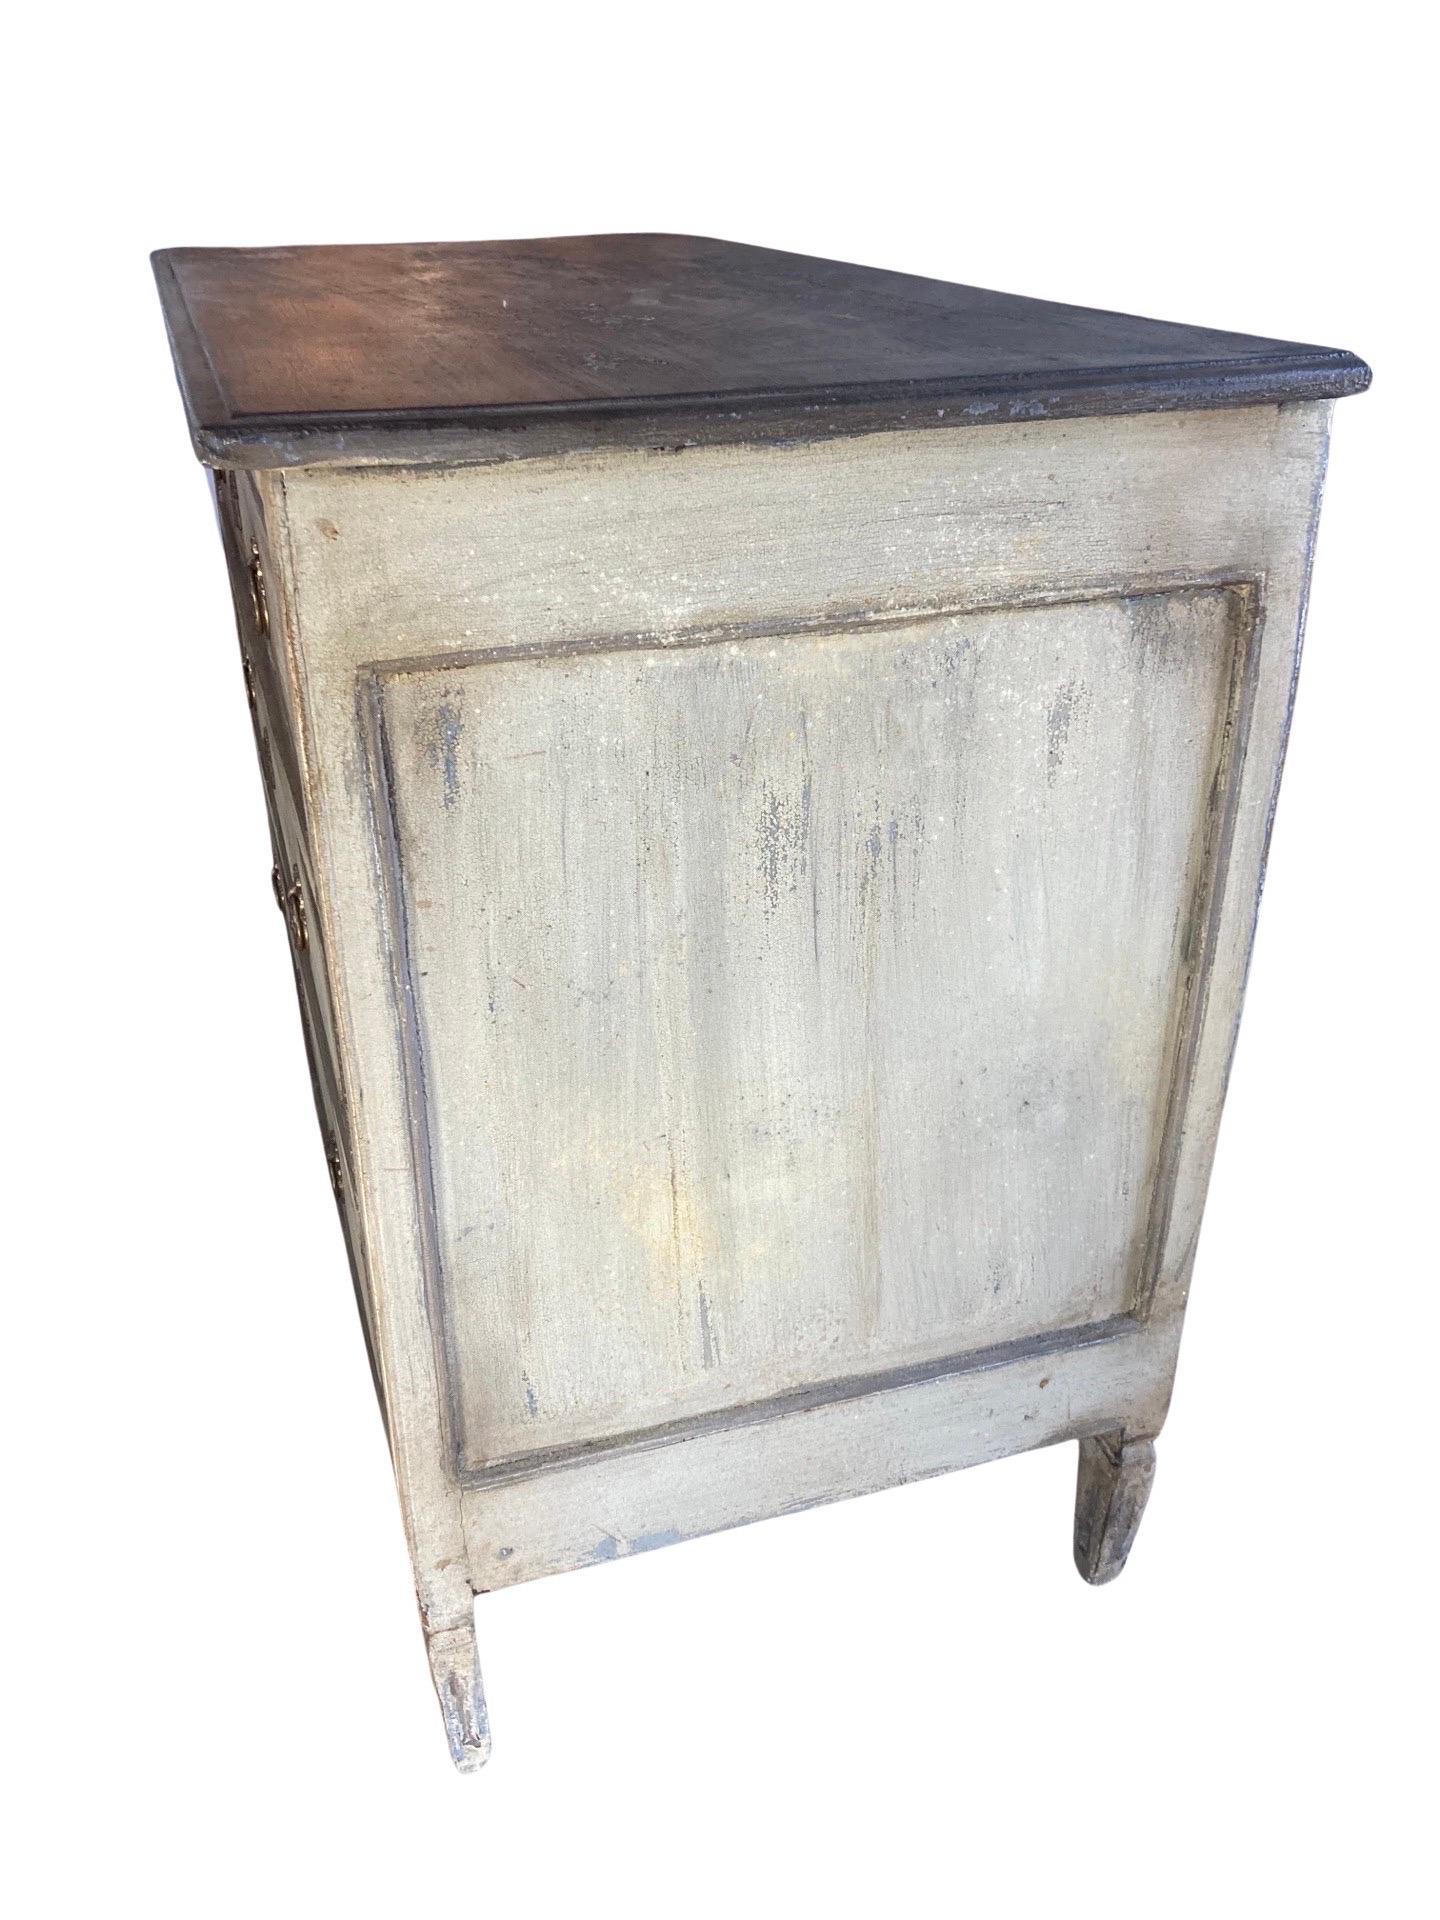 Painted Louis XVI commode hand-made in southern France in the mid 1700s using oak. The commode shows beautiful straight lines with some depth added by hand-carved fluting and two-toned paint. The commode features three inset drawers made of